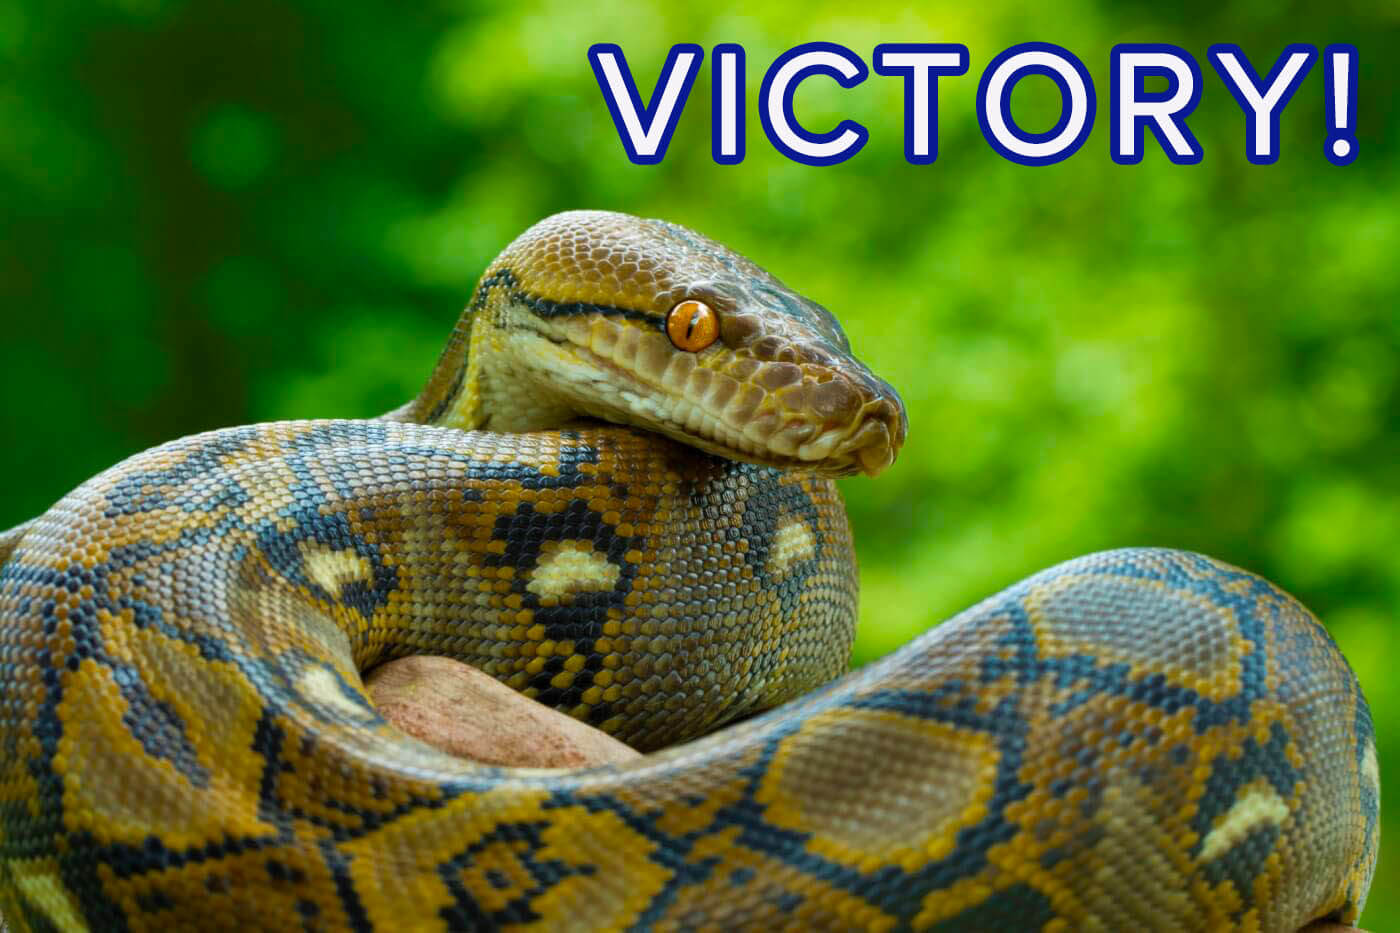 Python on a rock with victory text